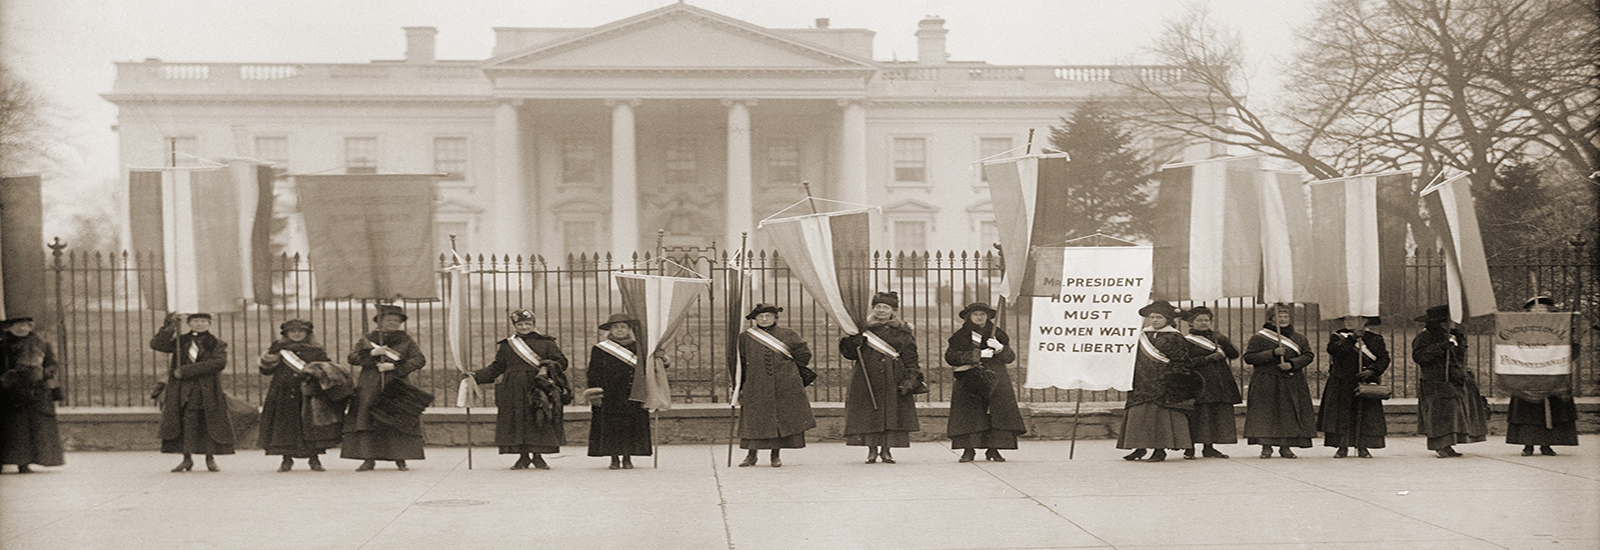 A historical stock photo of women suffragists protesting outside of the White House.